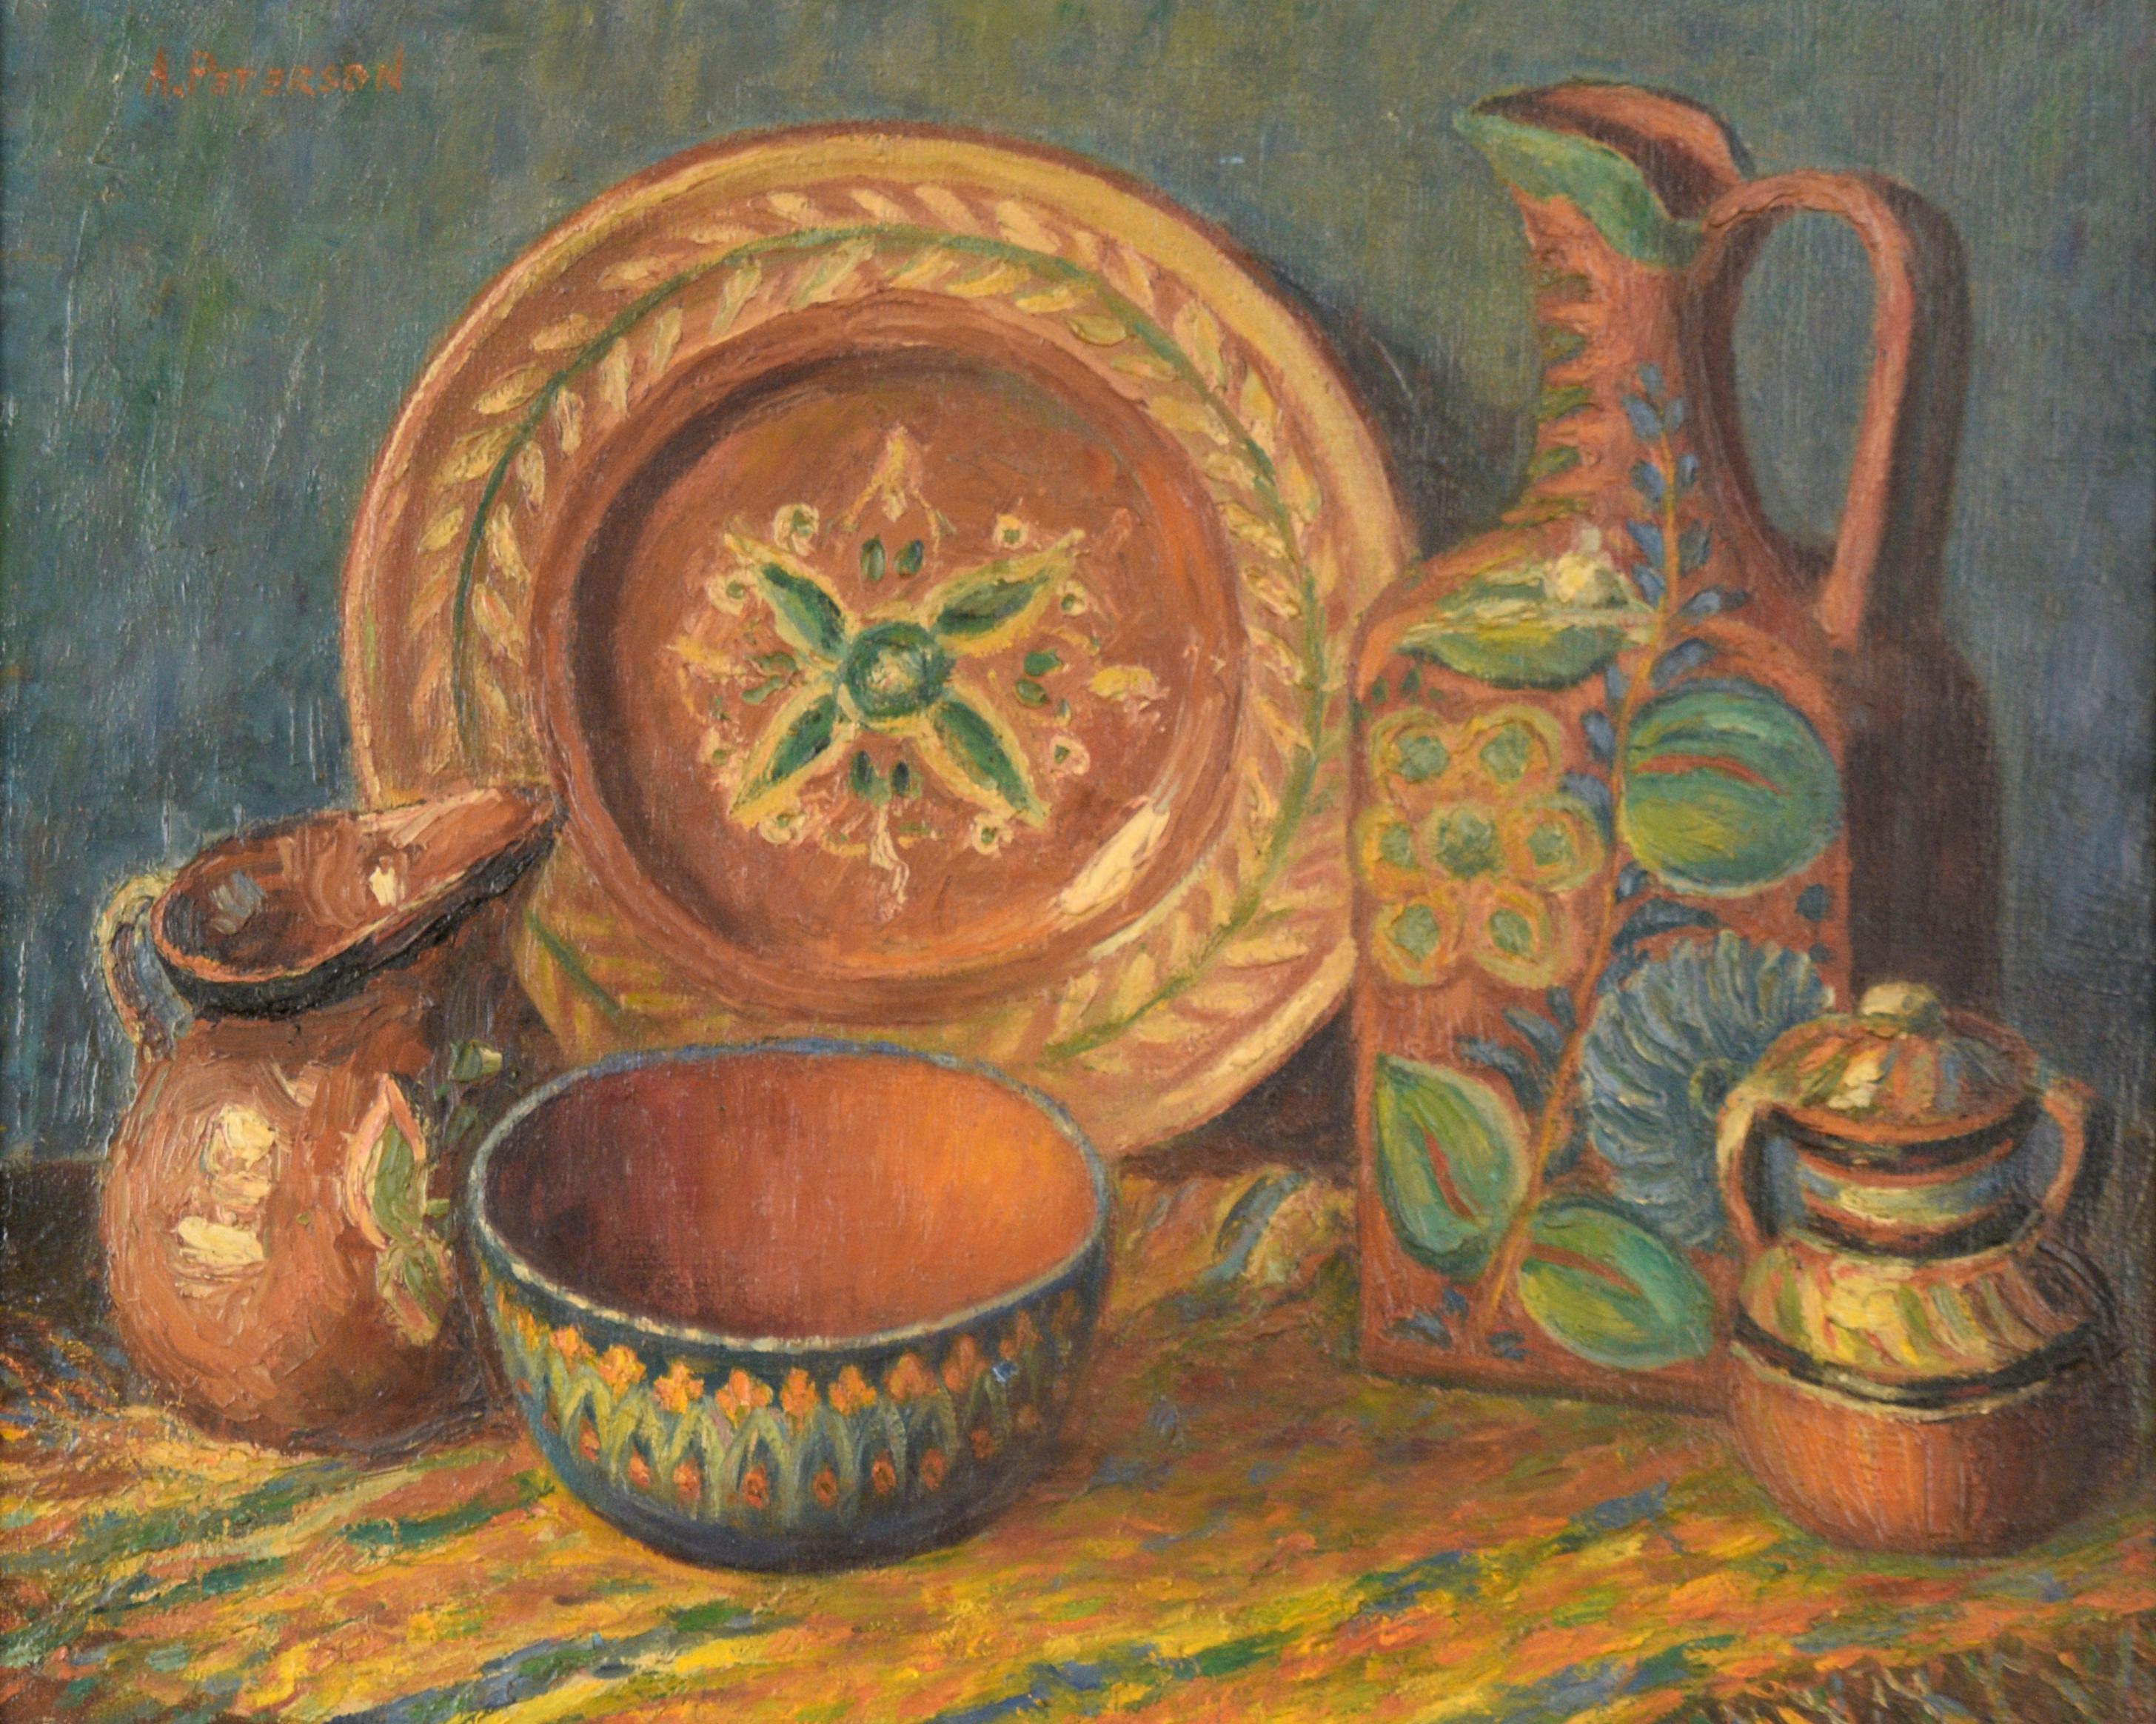 Still Life of Ornate Pottery - Oil on Canvas - Painting by A. Peterson